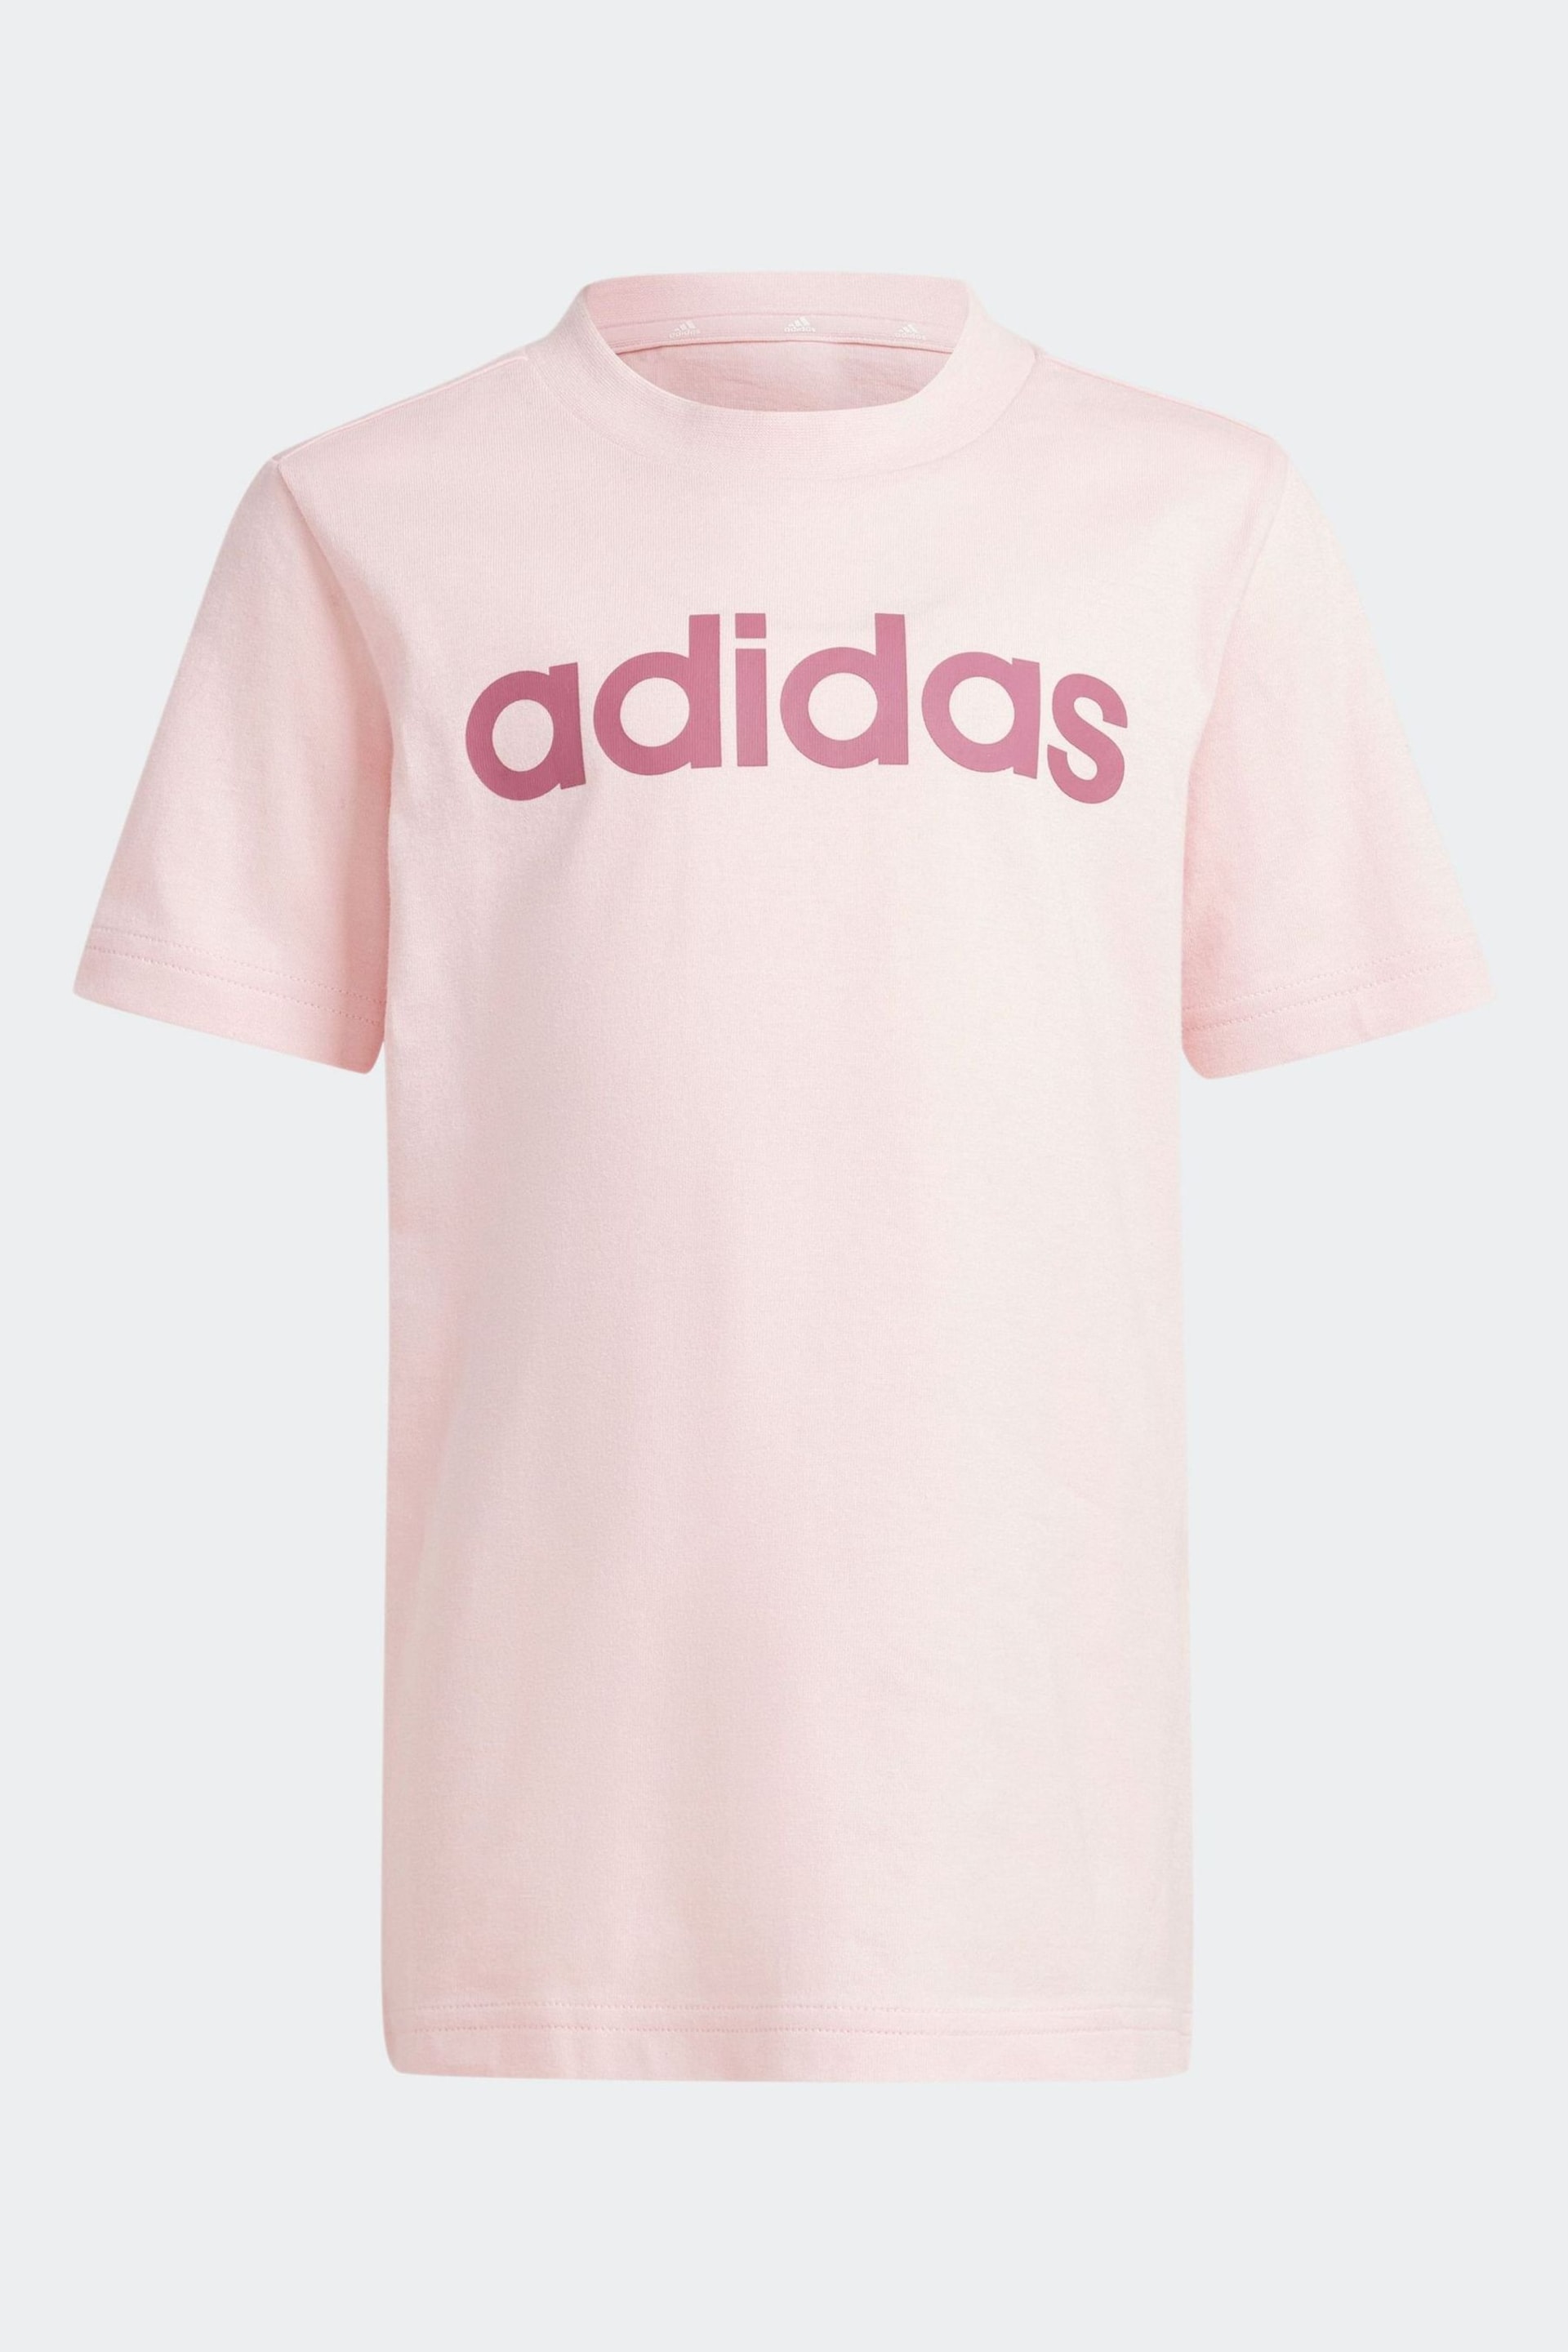 adidas Pink Essentials Lineage T-Shirt - Image 3 of 3